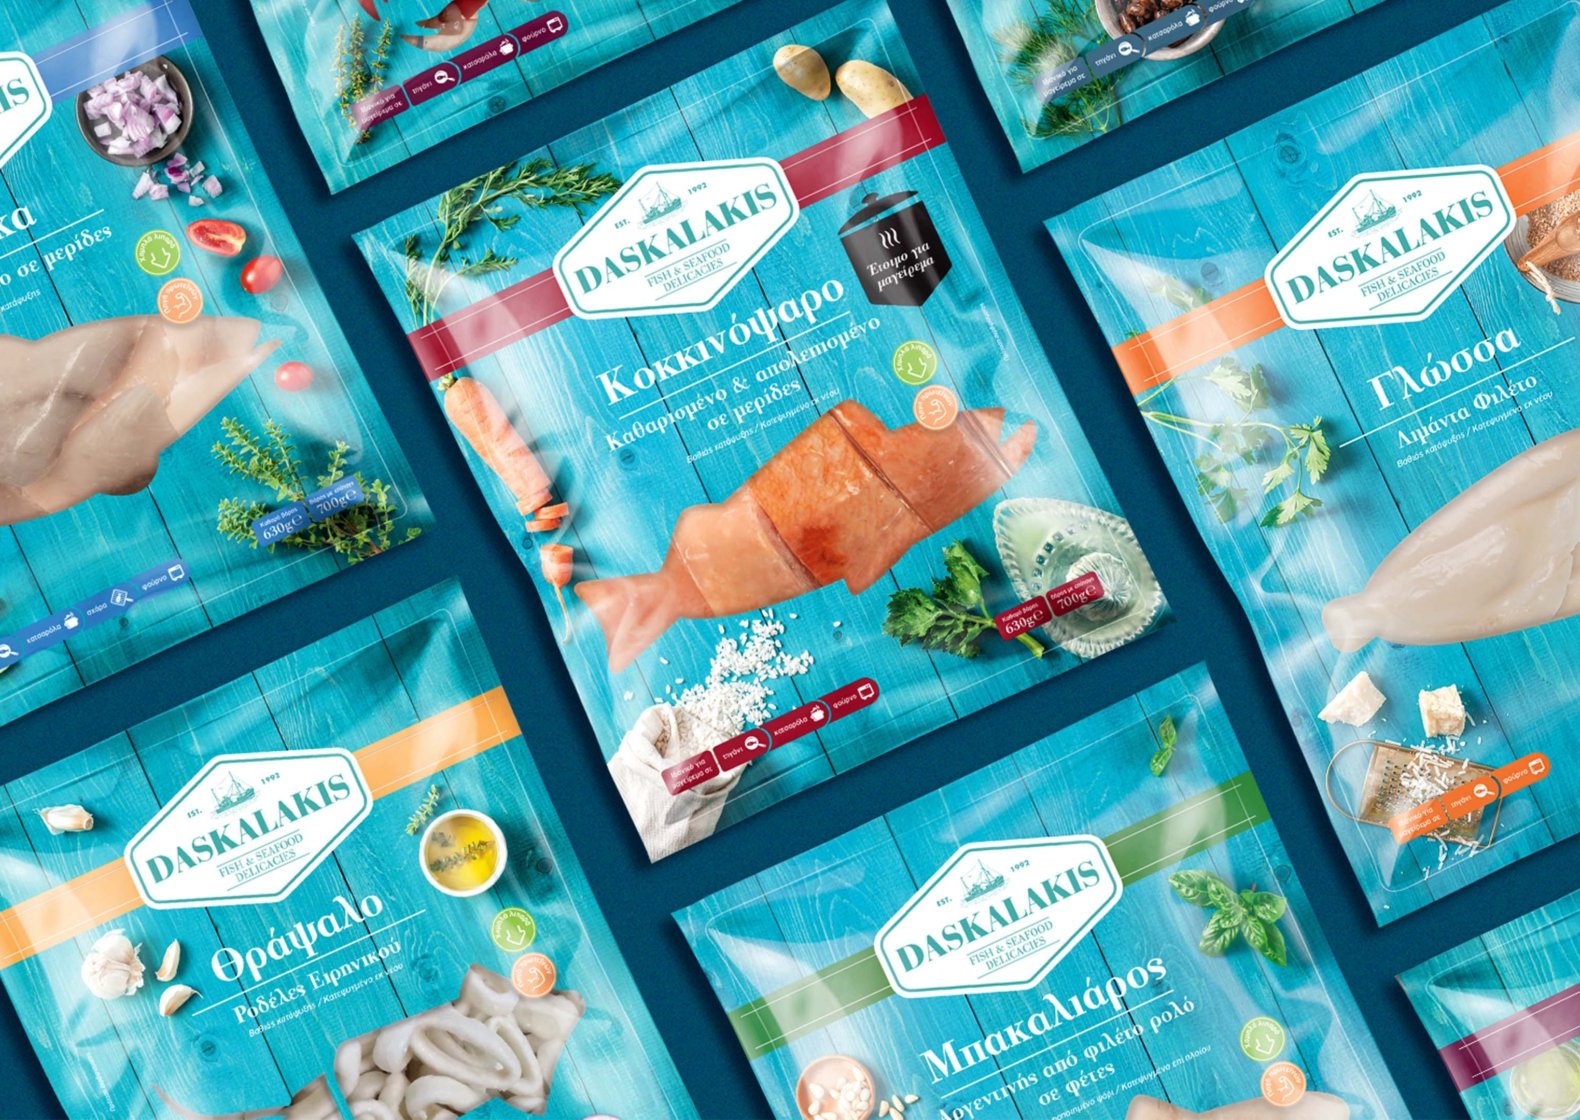 Daskalakis frozen fish and seafood rebranded variants in flowpacks aligned